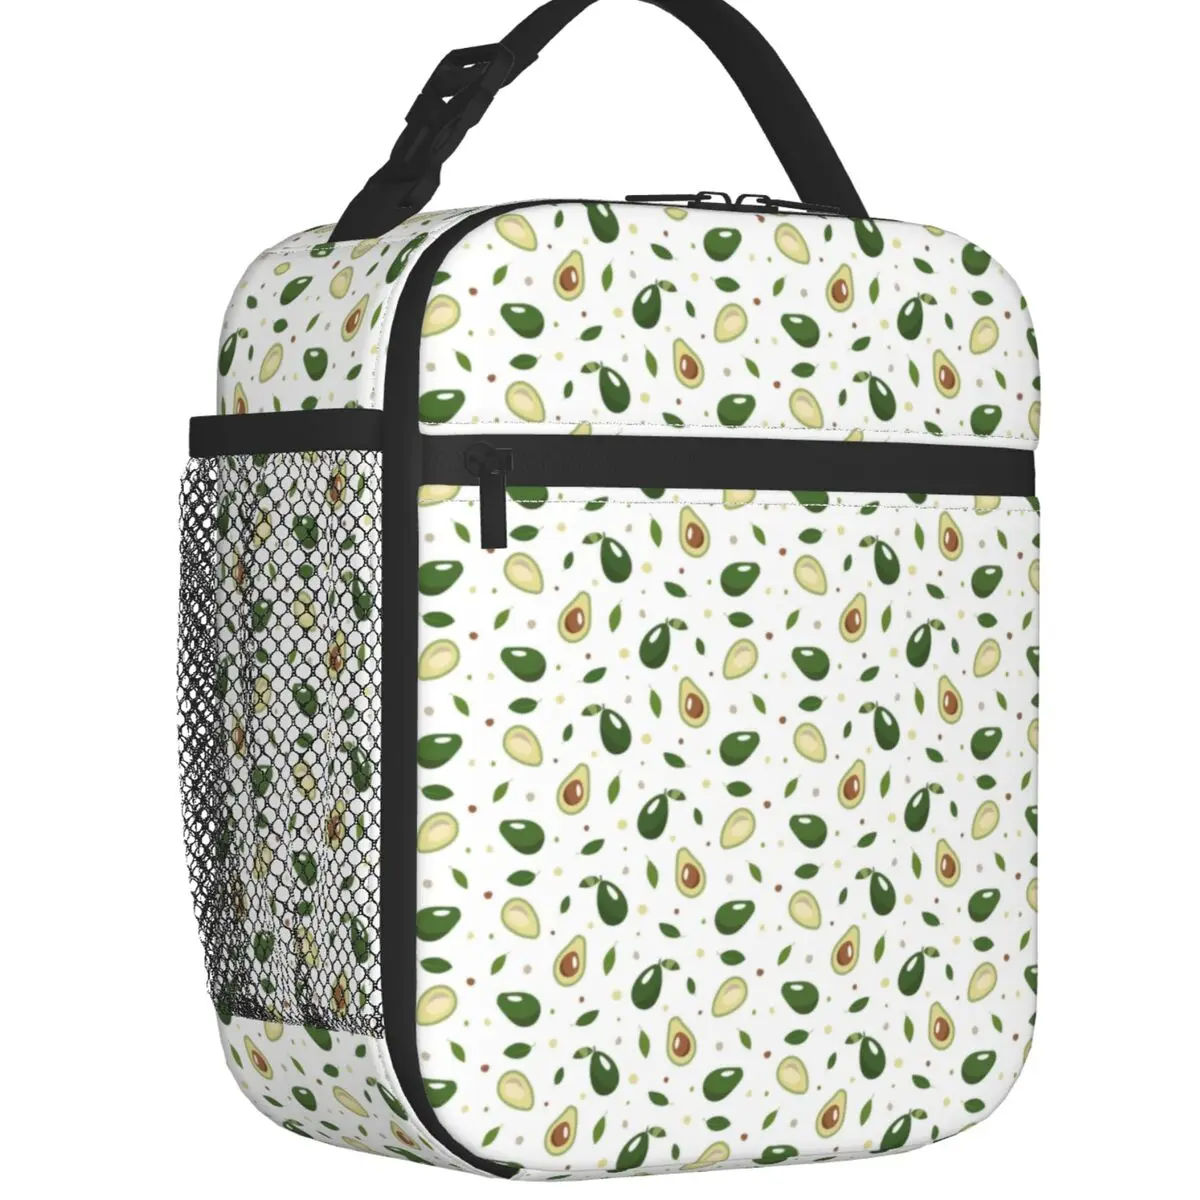 Summer Fruit Avocado Pattern Insulated Lunch Tote Bag for Women Portable Cooler Thermal Bento Box Outdoor Camping Travel